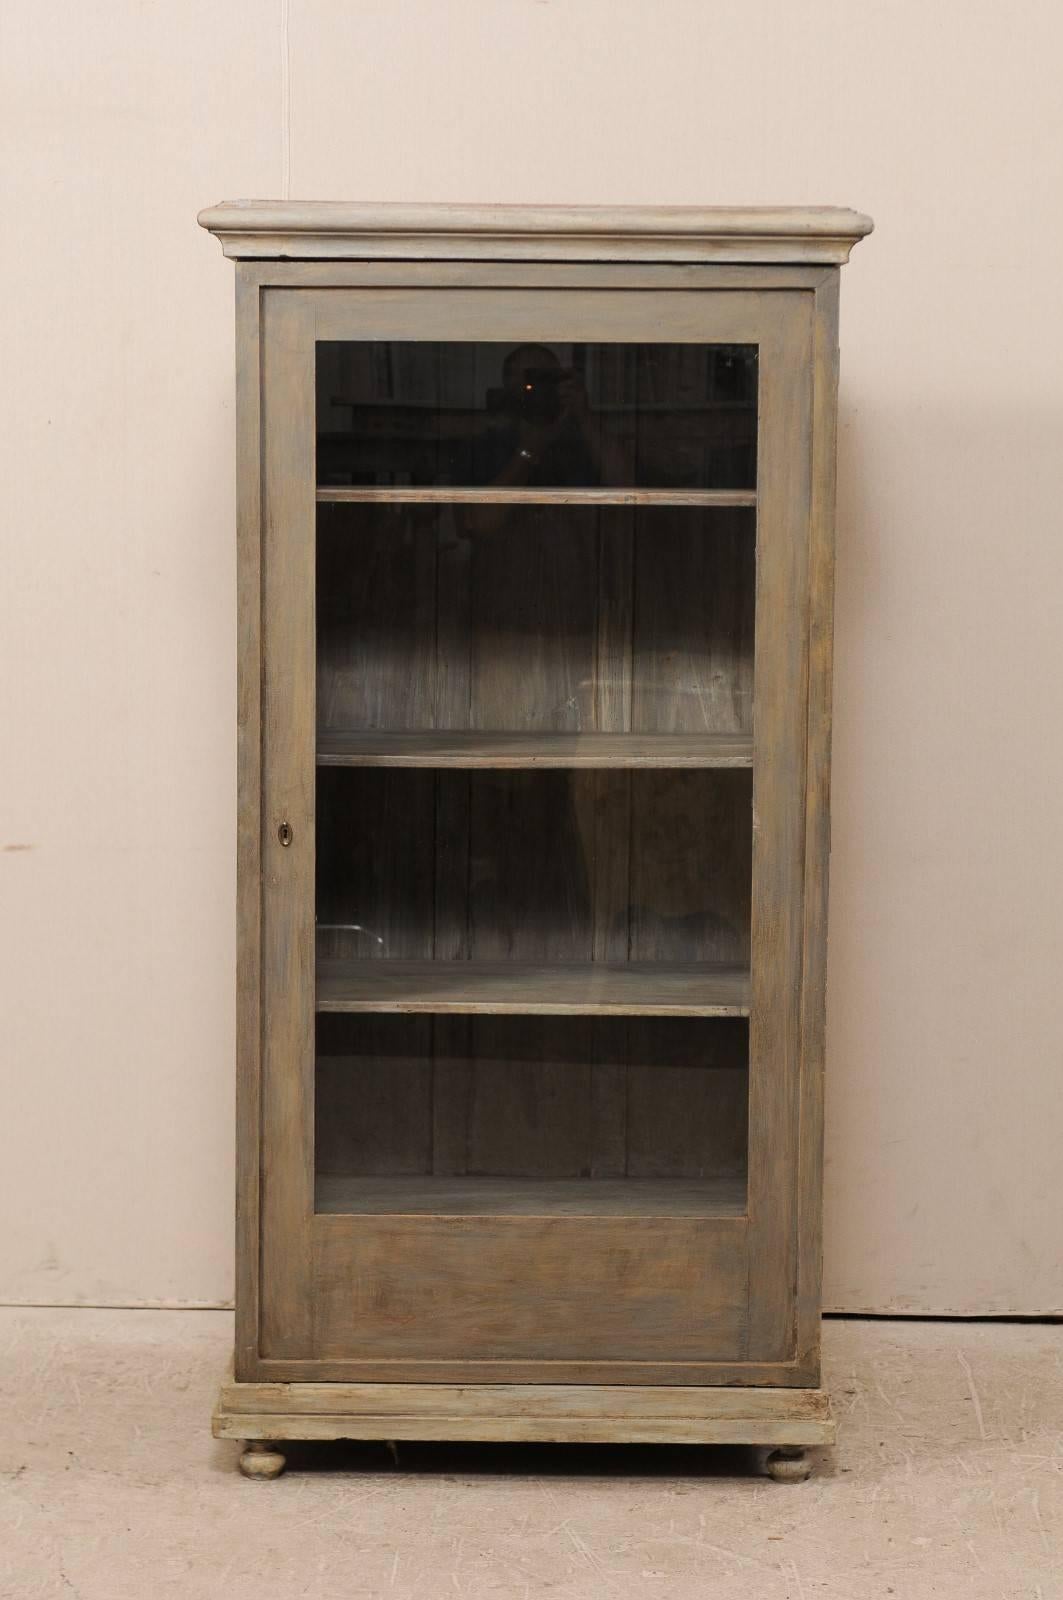 An early 20th century European painted wood vitrine. This painted wood display cabinet with single glass door features clean lines, accented by trim molding at the top and bottom, all raised nicely upon ball feet. The interior shelves are adjustable